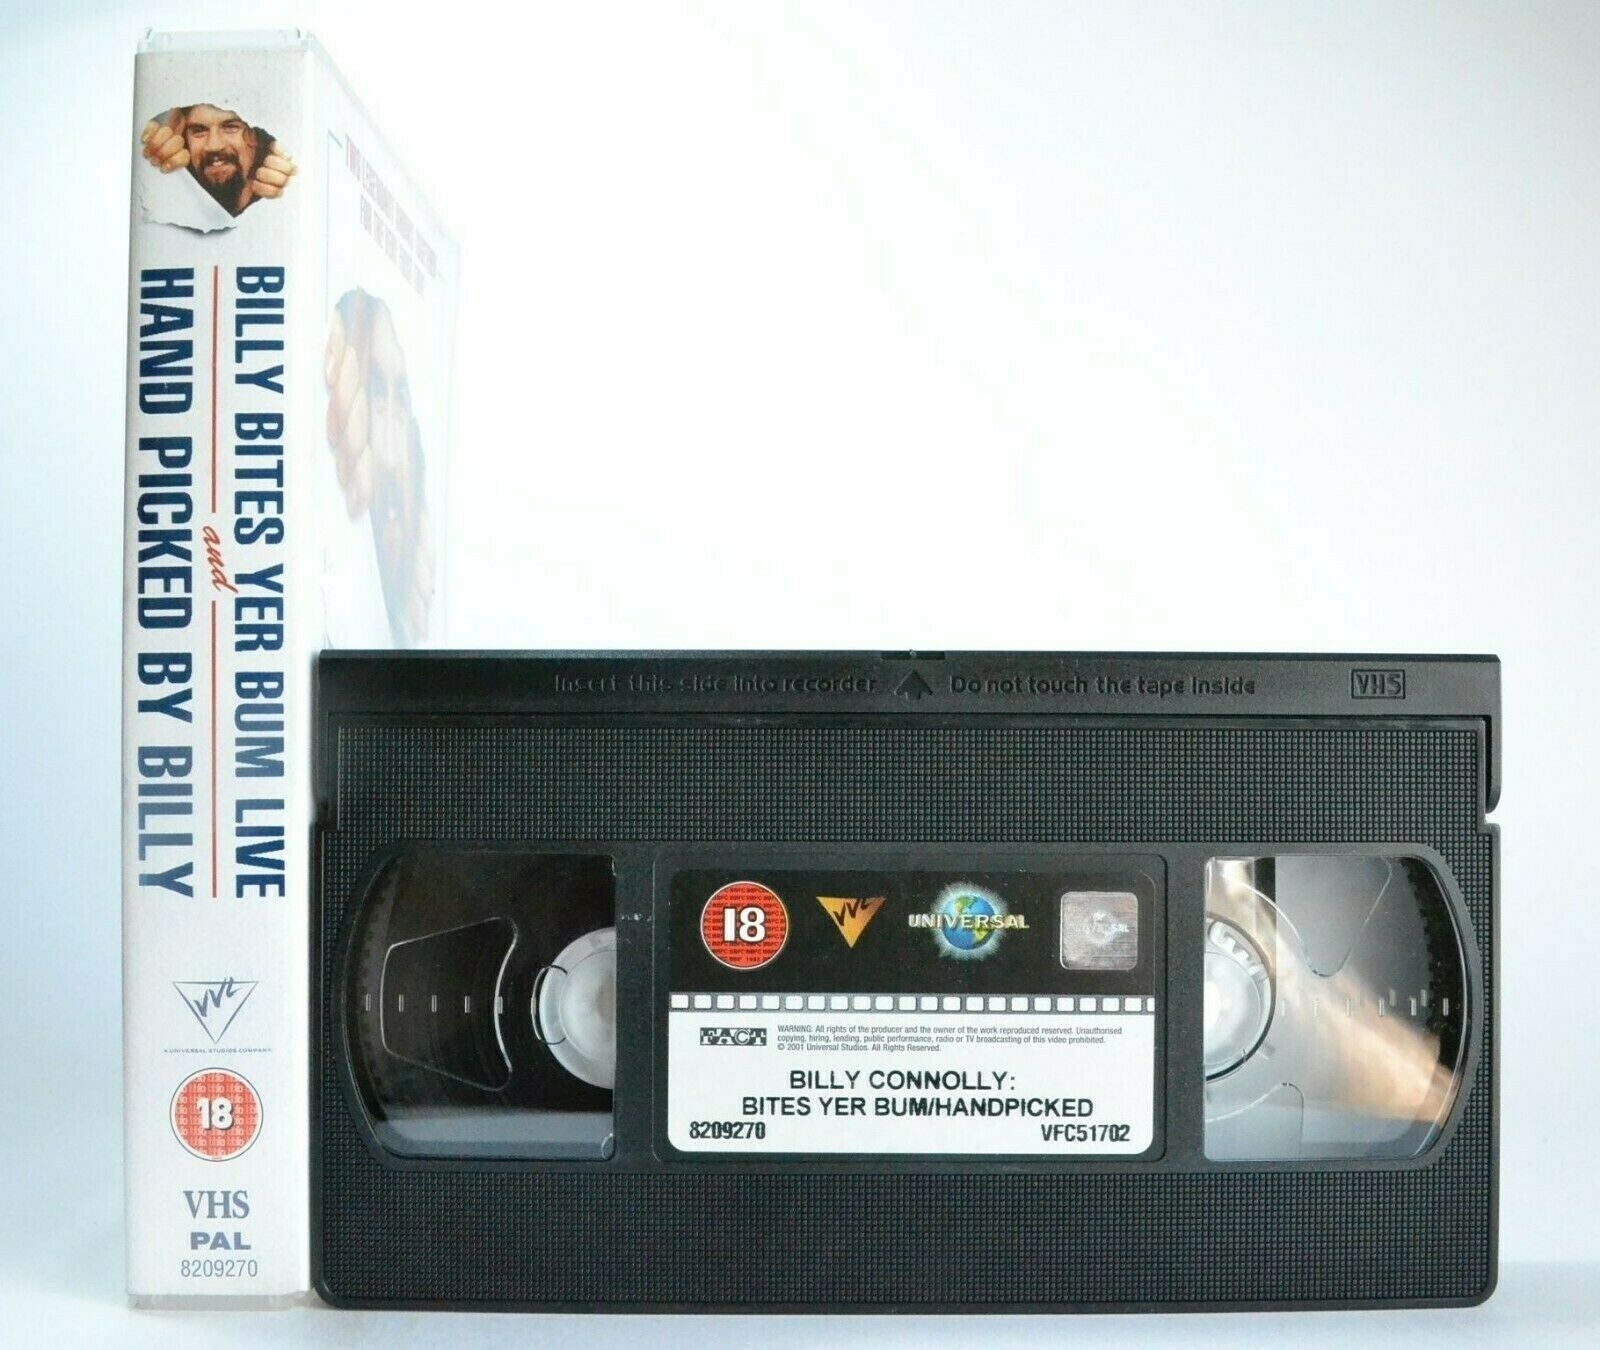 Billy Connolly: Bites Yer Bum (1980)/Handpicked (1981) - Live Comedy Shows - VHS-